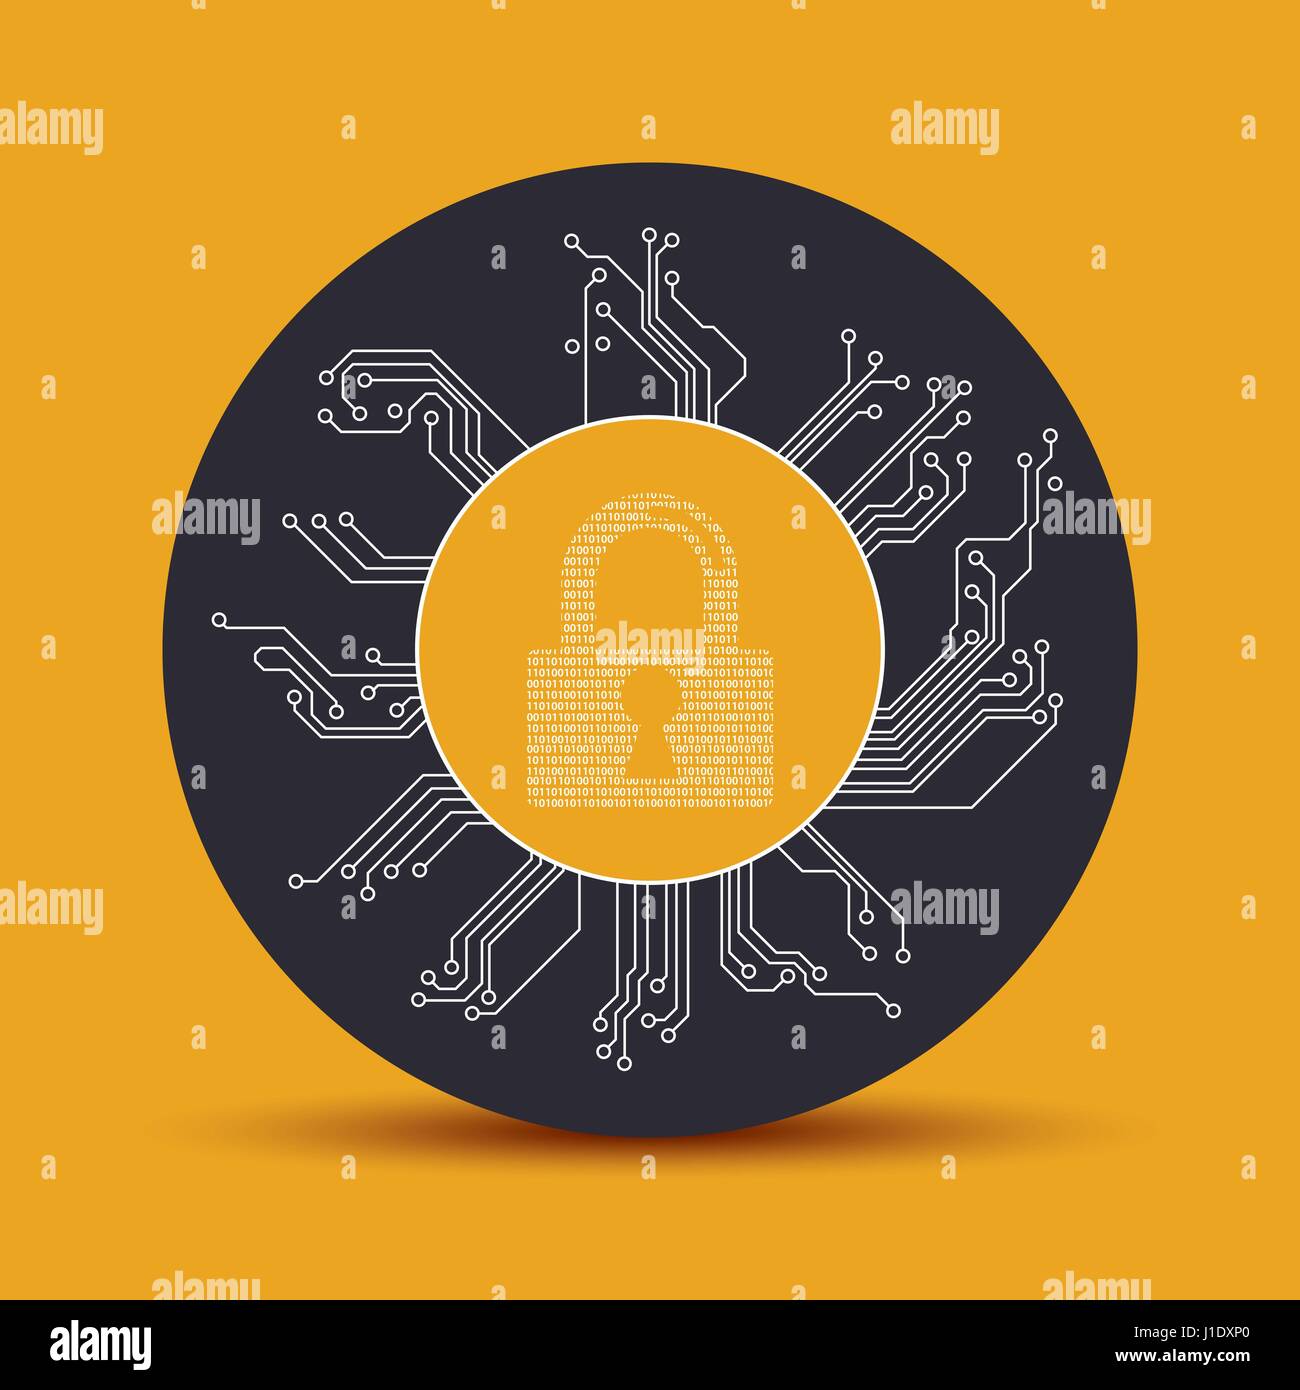 Cyber security design vector illustration graphic Stock Vector